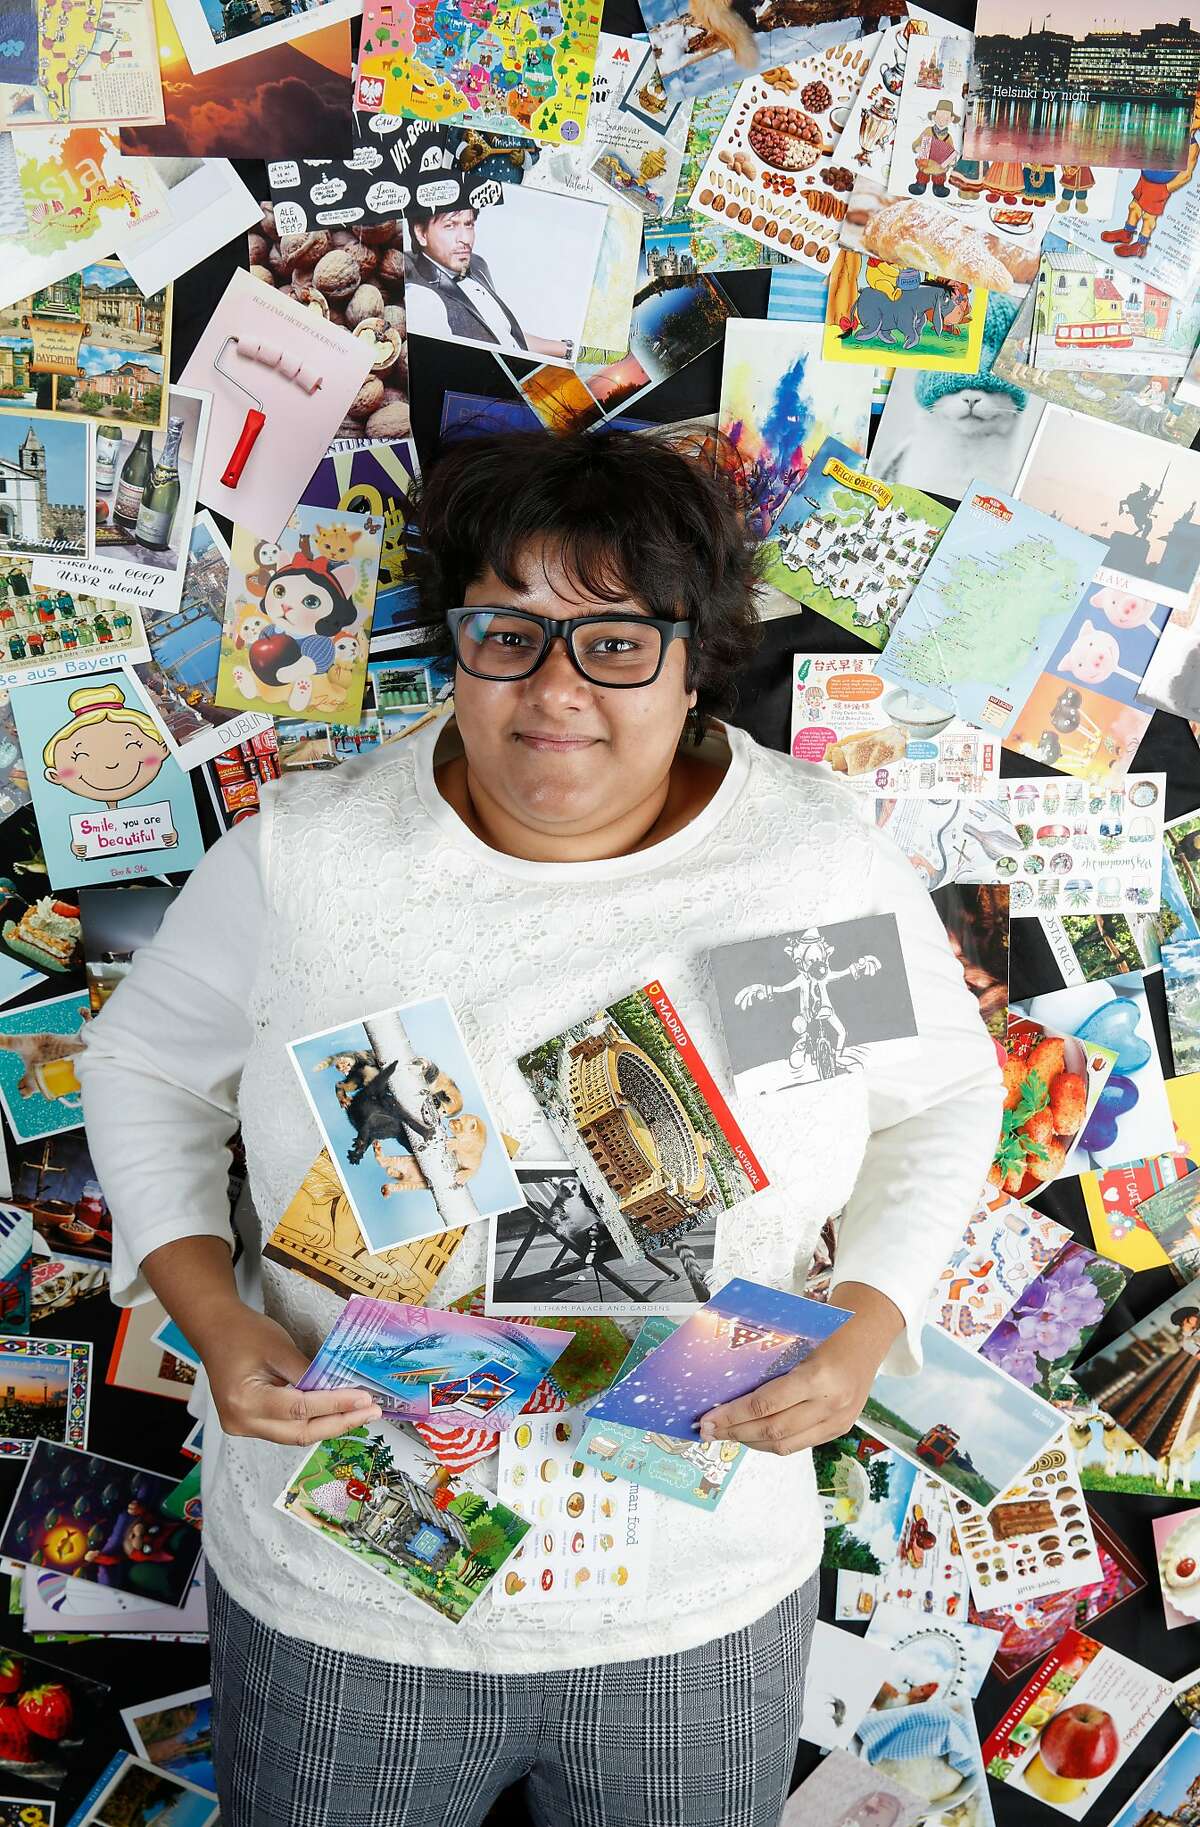 Rumana Sultana, seen on Monday, Sept. 23, 2019 in San Francisco, Calif., has amassed a collection of over 3,000 postcards from around the world in the 13 years she has been collecting them.